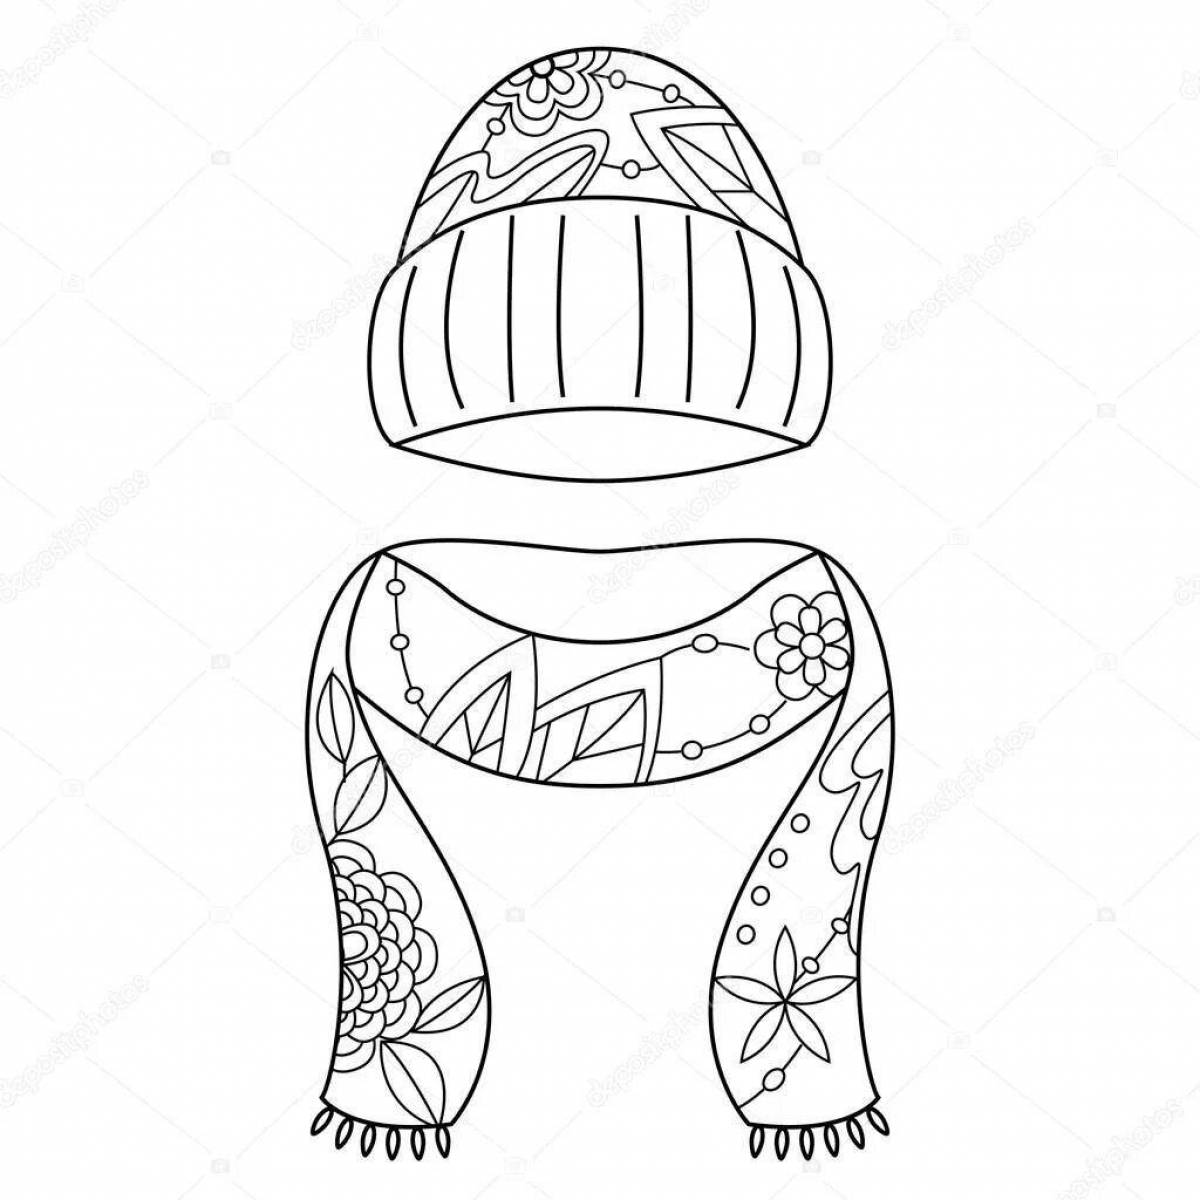 Coloring page playful hat and gloves